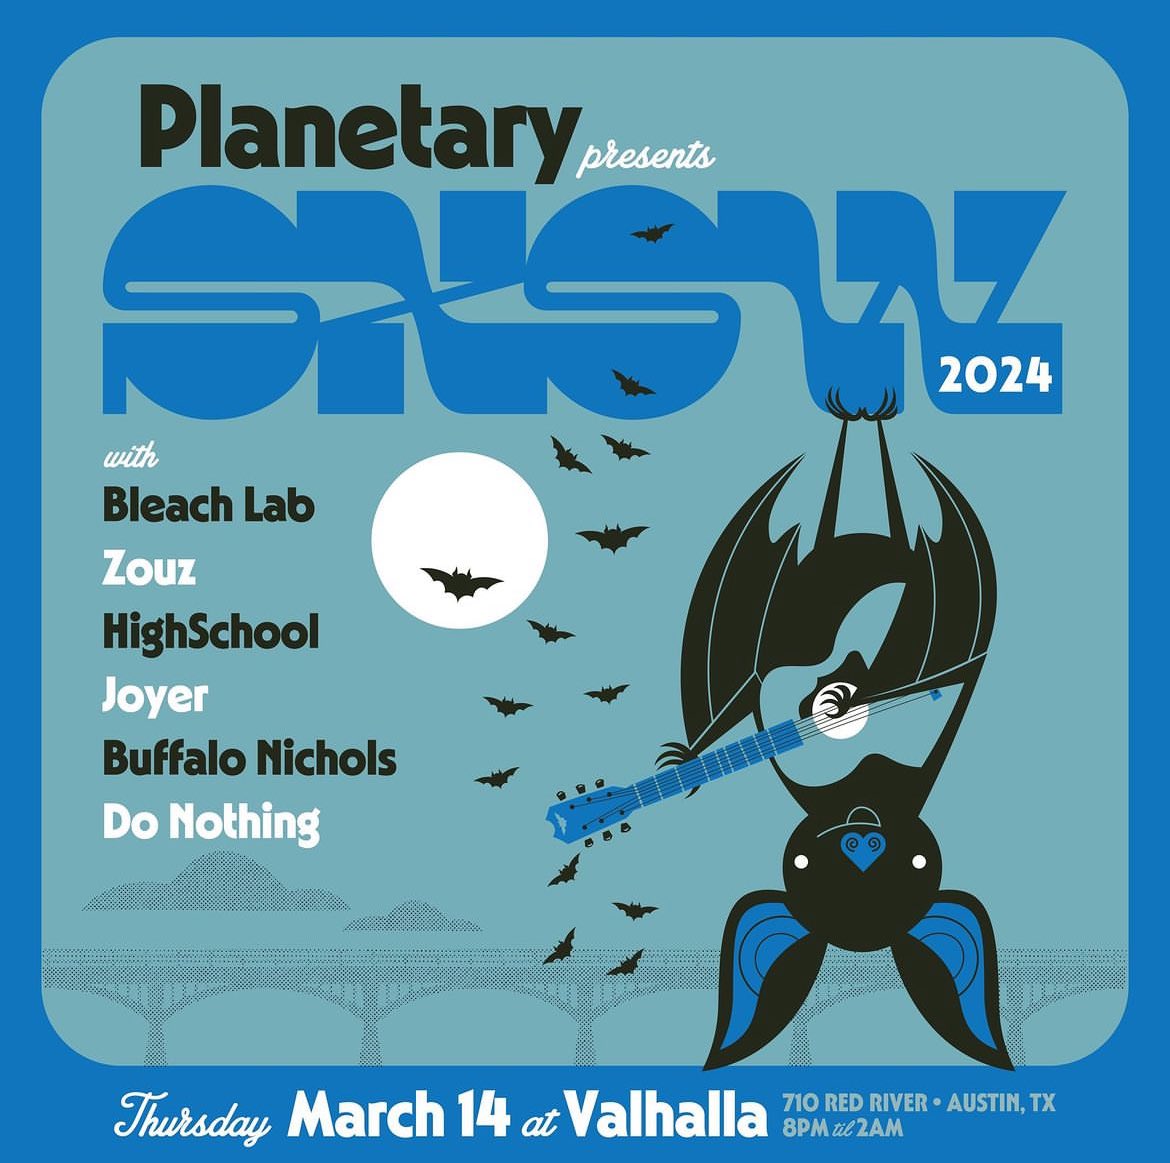 PLANETARY GROUP SXSW SHOWCASE 🗓 Thurs 3/14 • 8pm-2am 📍 Valhalla (710 Red River) 8pm - Do Nothing 9pm - Buffalo Nichols 10pm - Joyner 11pm - HighSchool 12am - zouz 1am - Bleach Lab This is an official showcase. Badges & wristbands get priority. #SXSW @sxsw